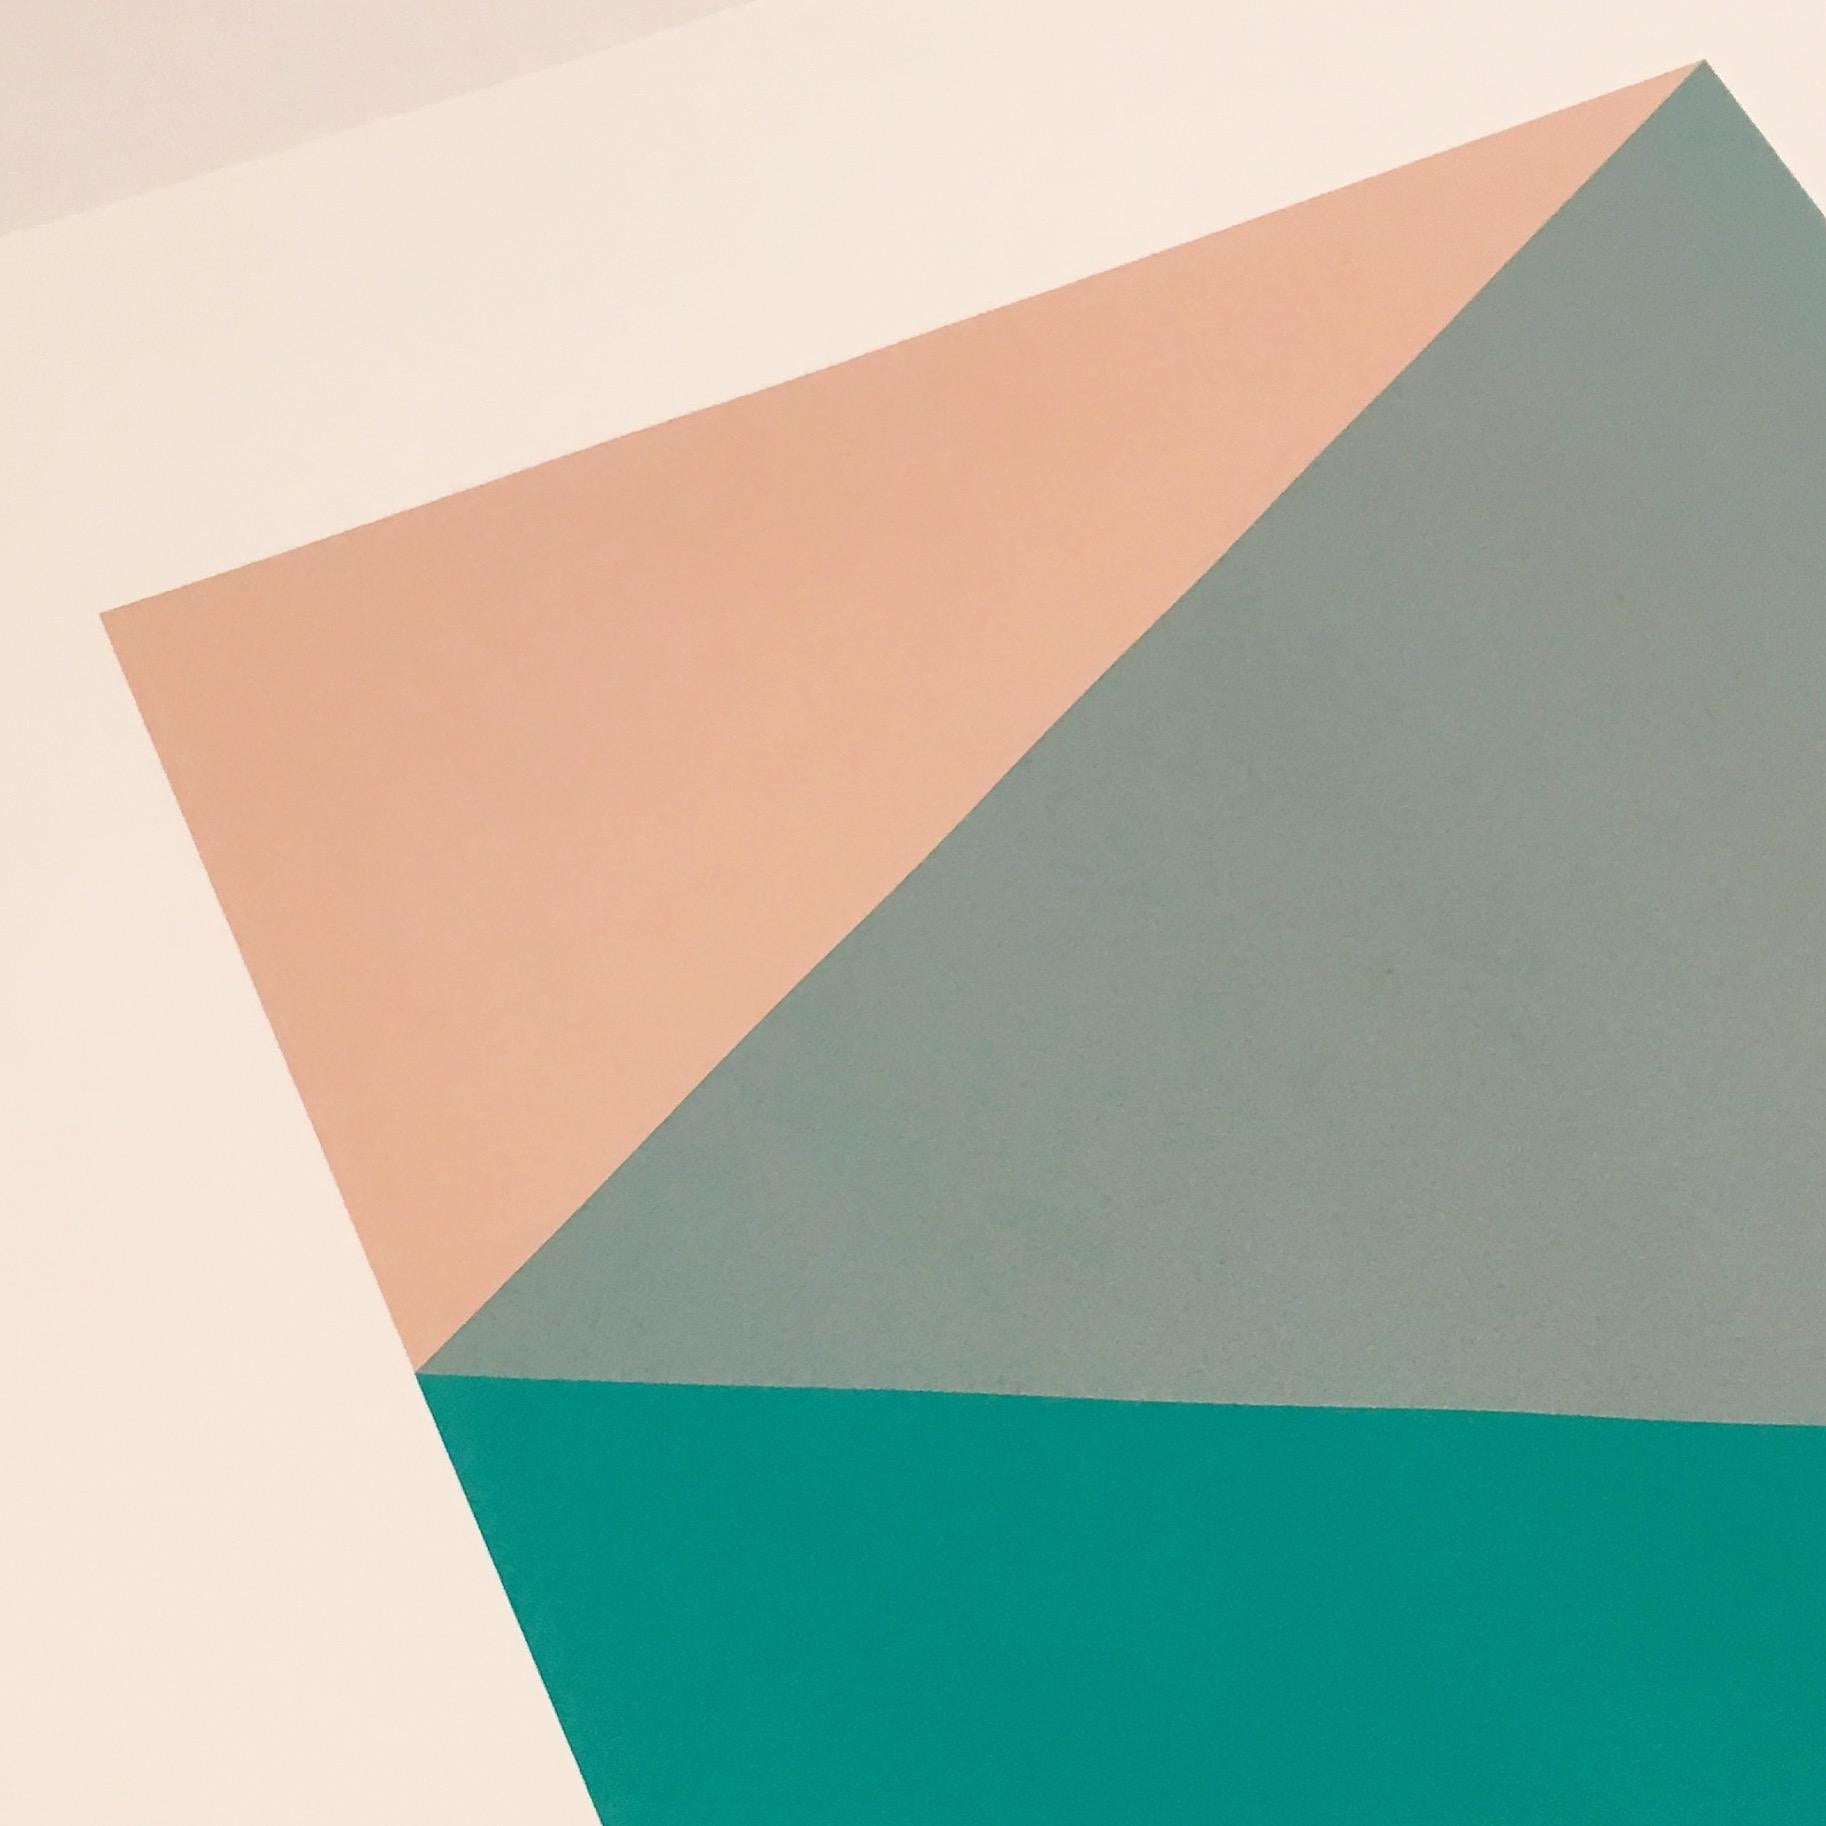 Colour Study 002: Limited Edition Screenprint by Laura Jane Scott For Sale 3